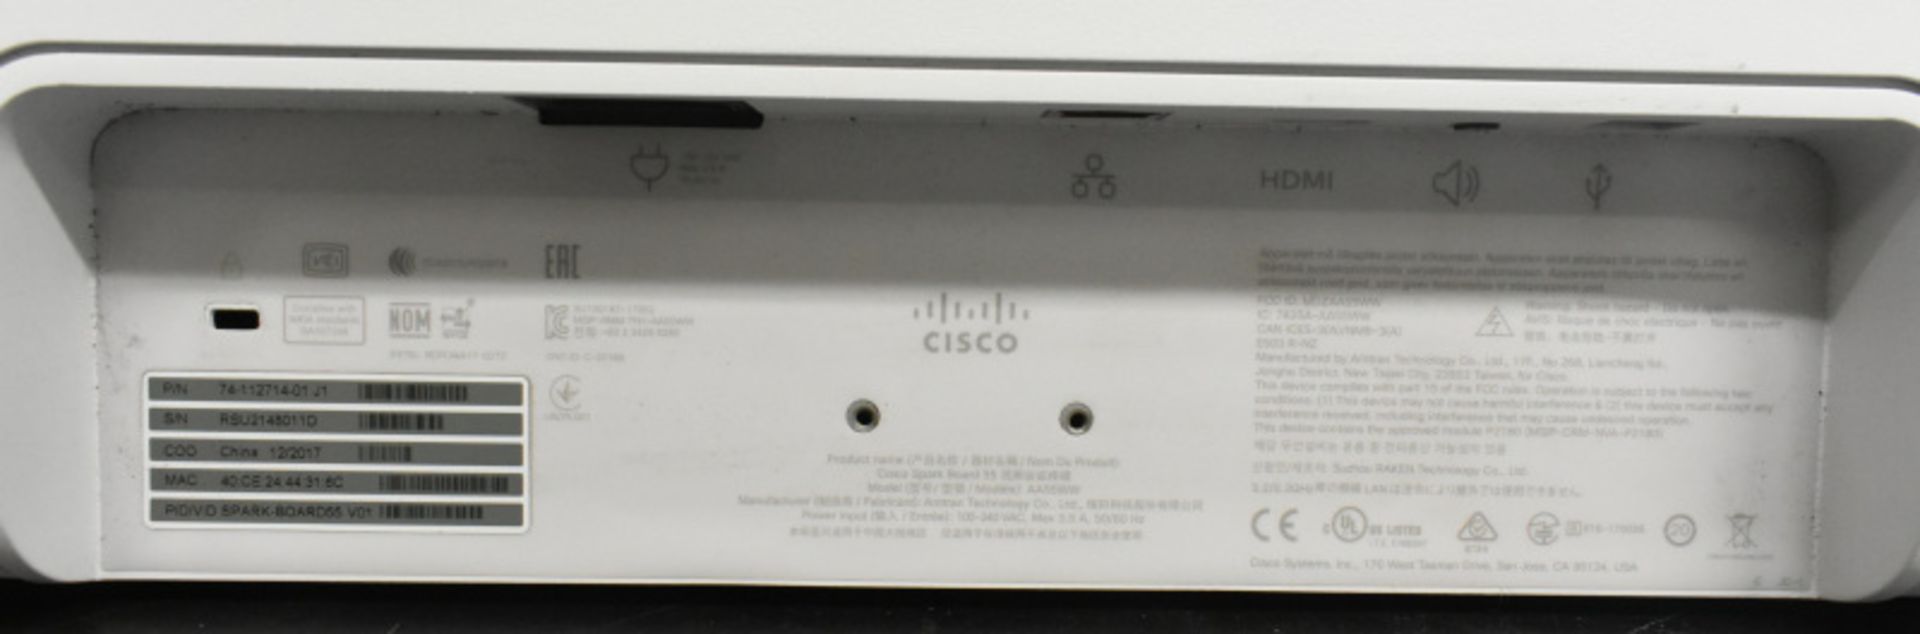 Cisco 74-112714-01 Spark-Board55 Video Conferencing Touch Screen - Image 8 of 12